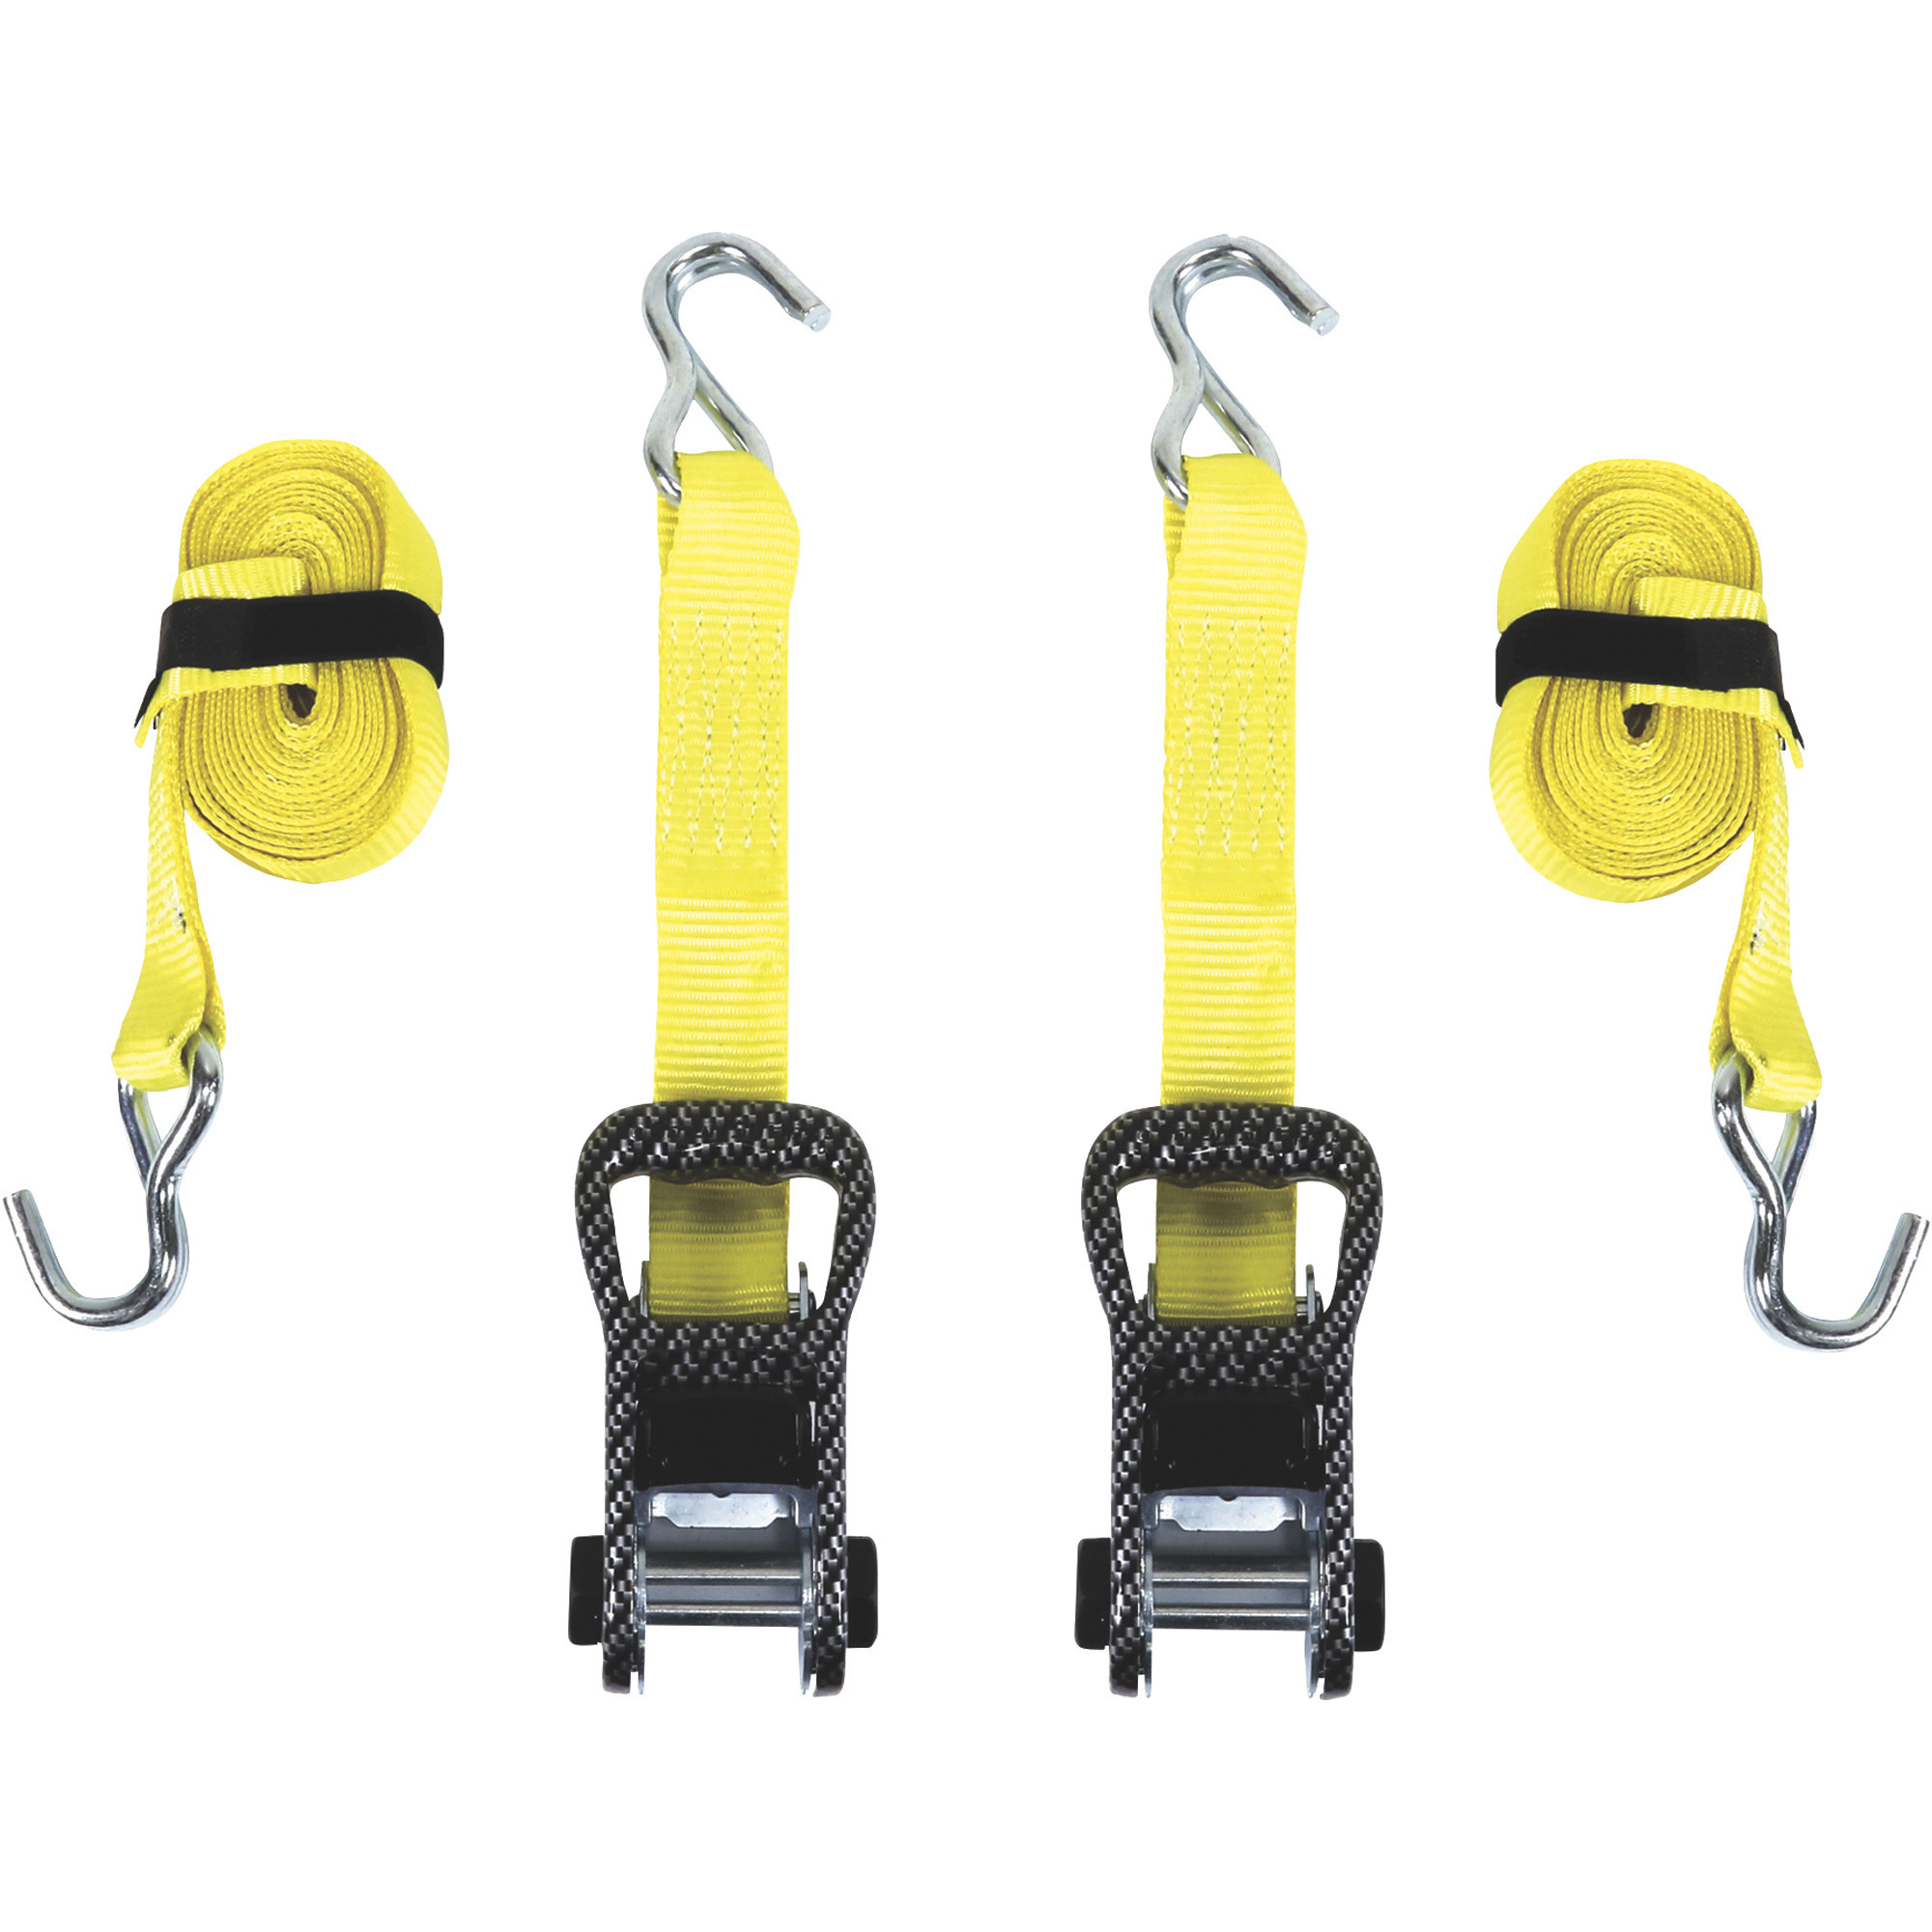 SmartStraps CarbonX Ratchet Tie-Downs, 2-Pack, 14ft. x 1.5Inch Each, 5,000-Lb. Breaking Strength, Yellow, Model 259